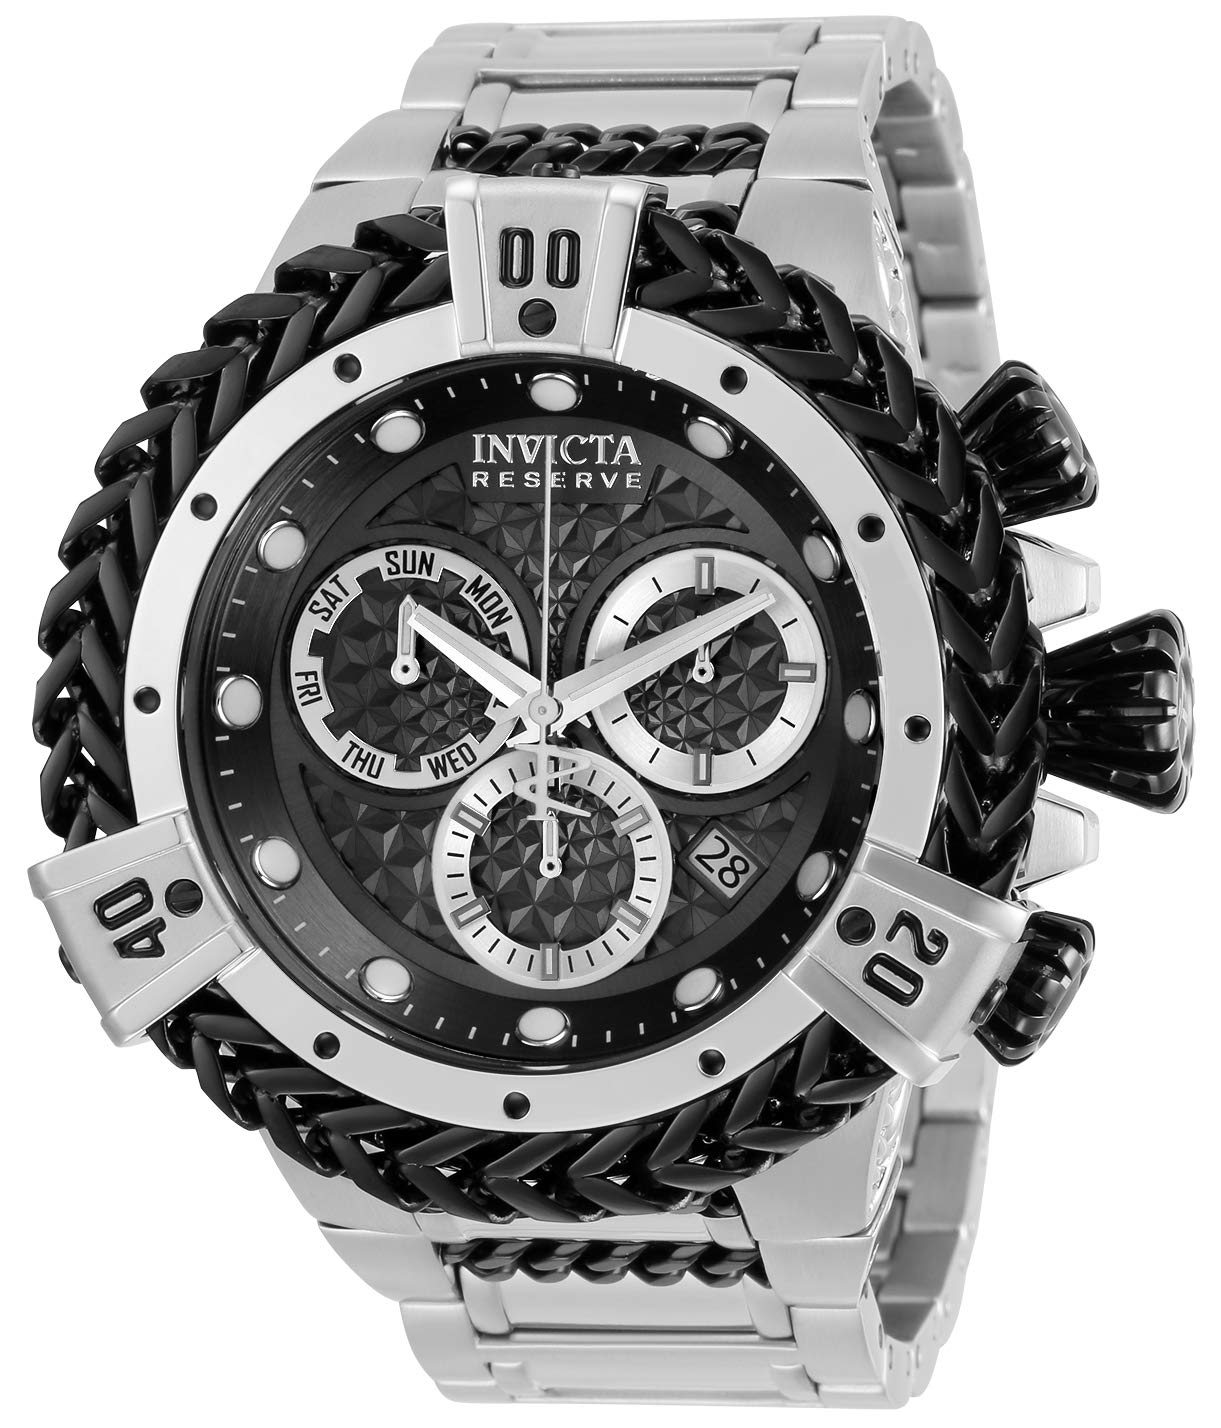 Invicta Men's Reserve Quartz Watch with Stainless Steel Strap, Silver, 31 (Model: 30541)